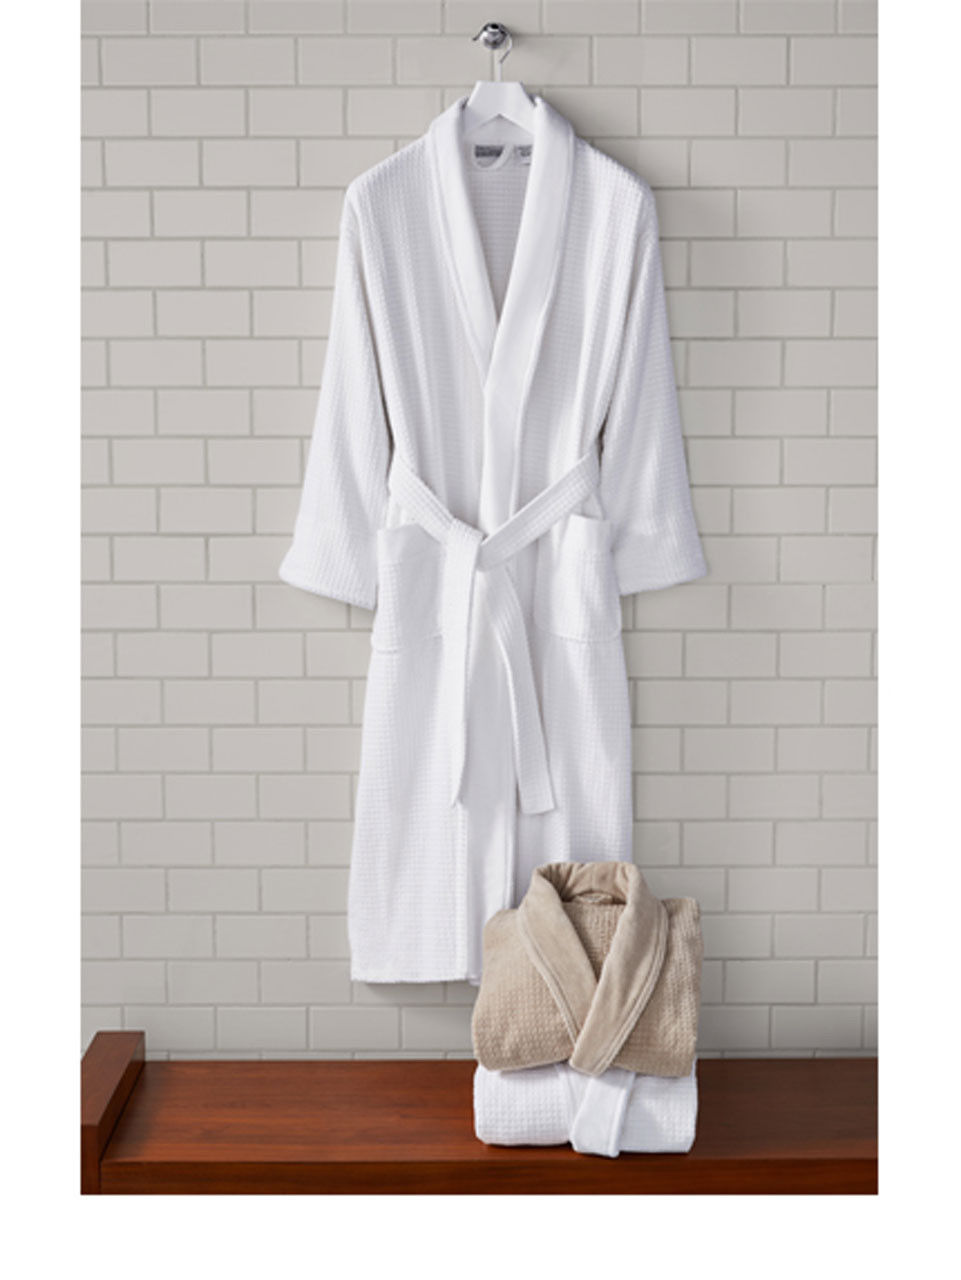 Before purchasing, how can the 1concier robe, specifically the Platinum Shawl Collar, enhance guest experience?